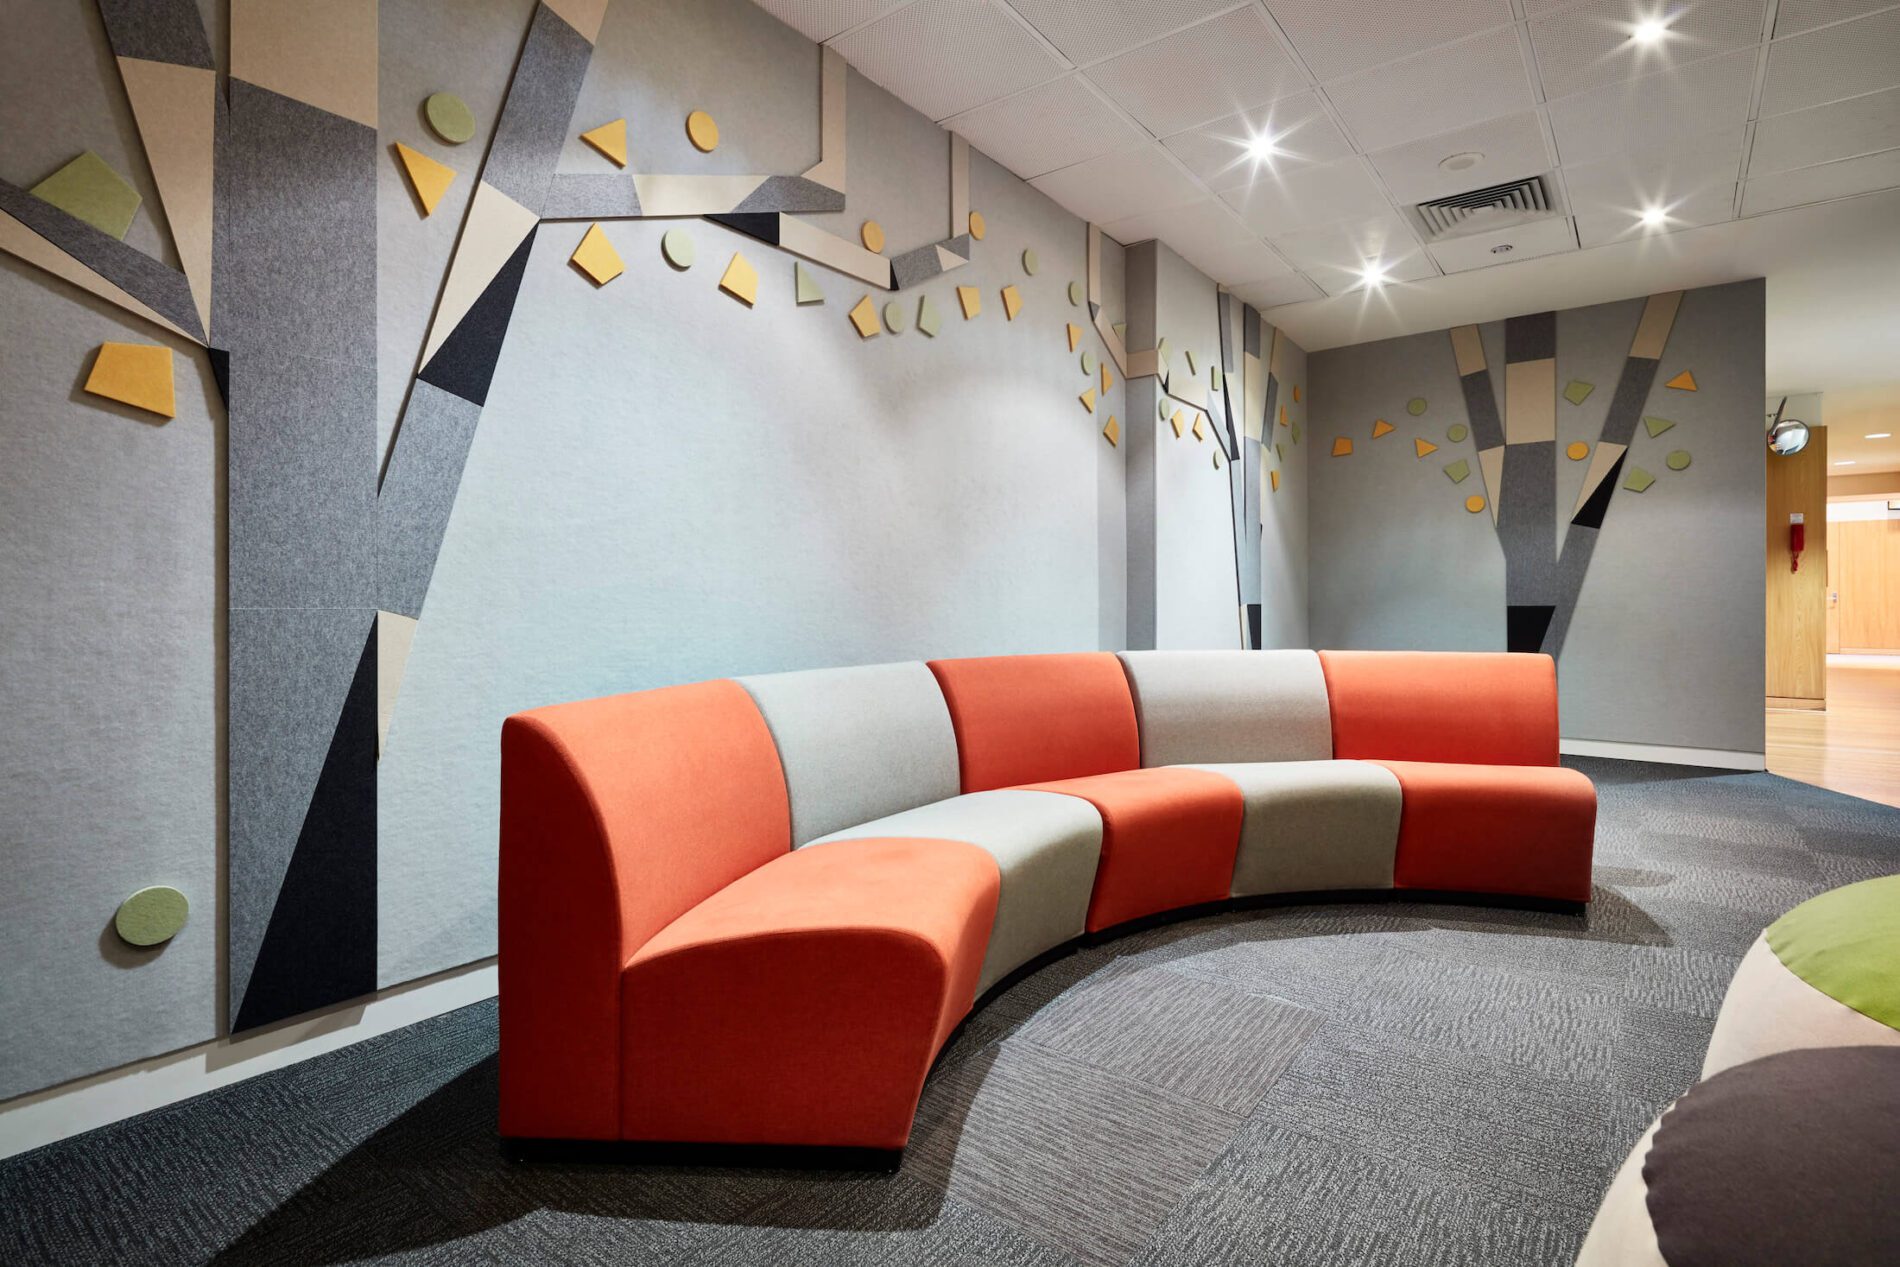 Curved, coloured seating, felt wall details in waiting areas